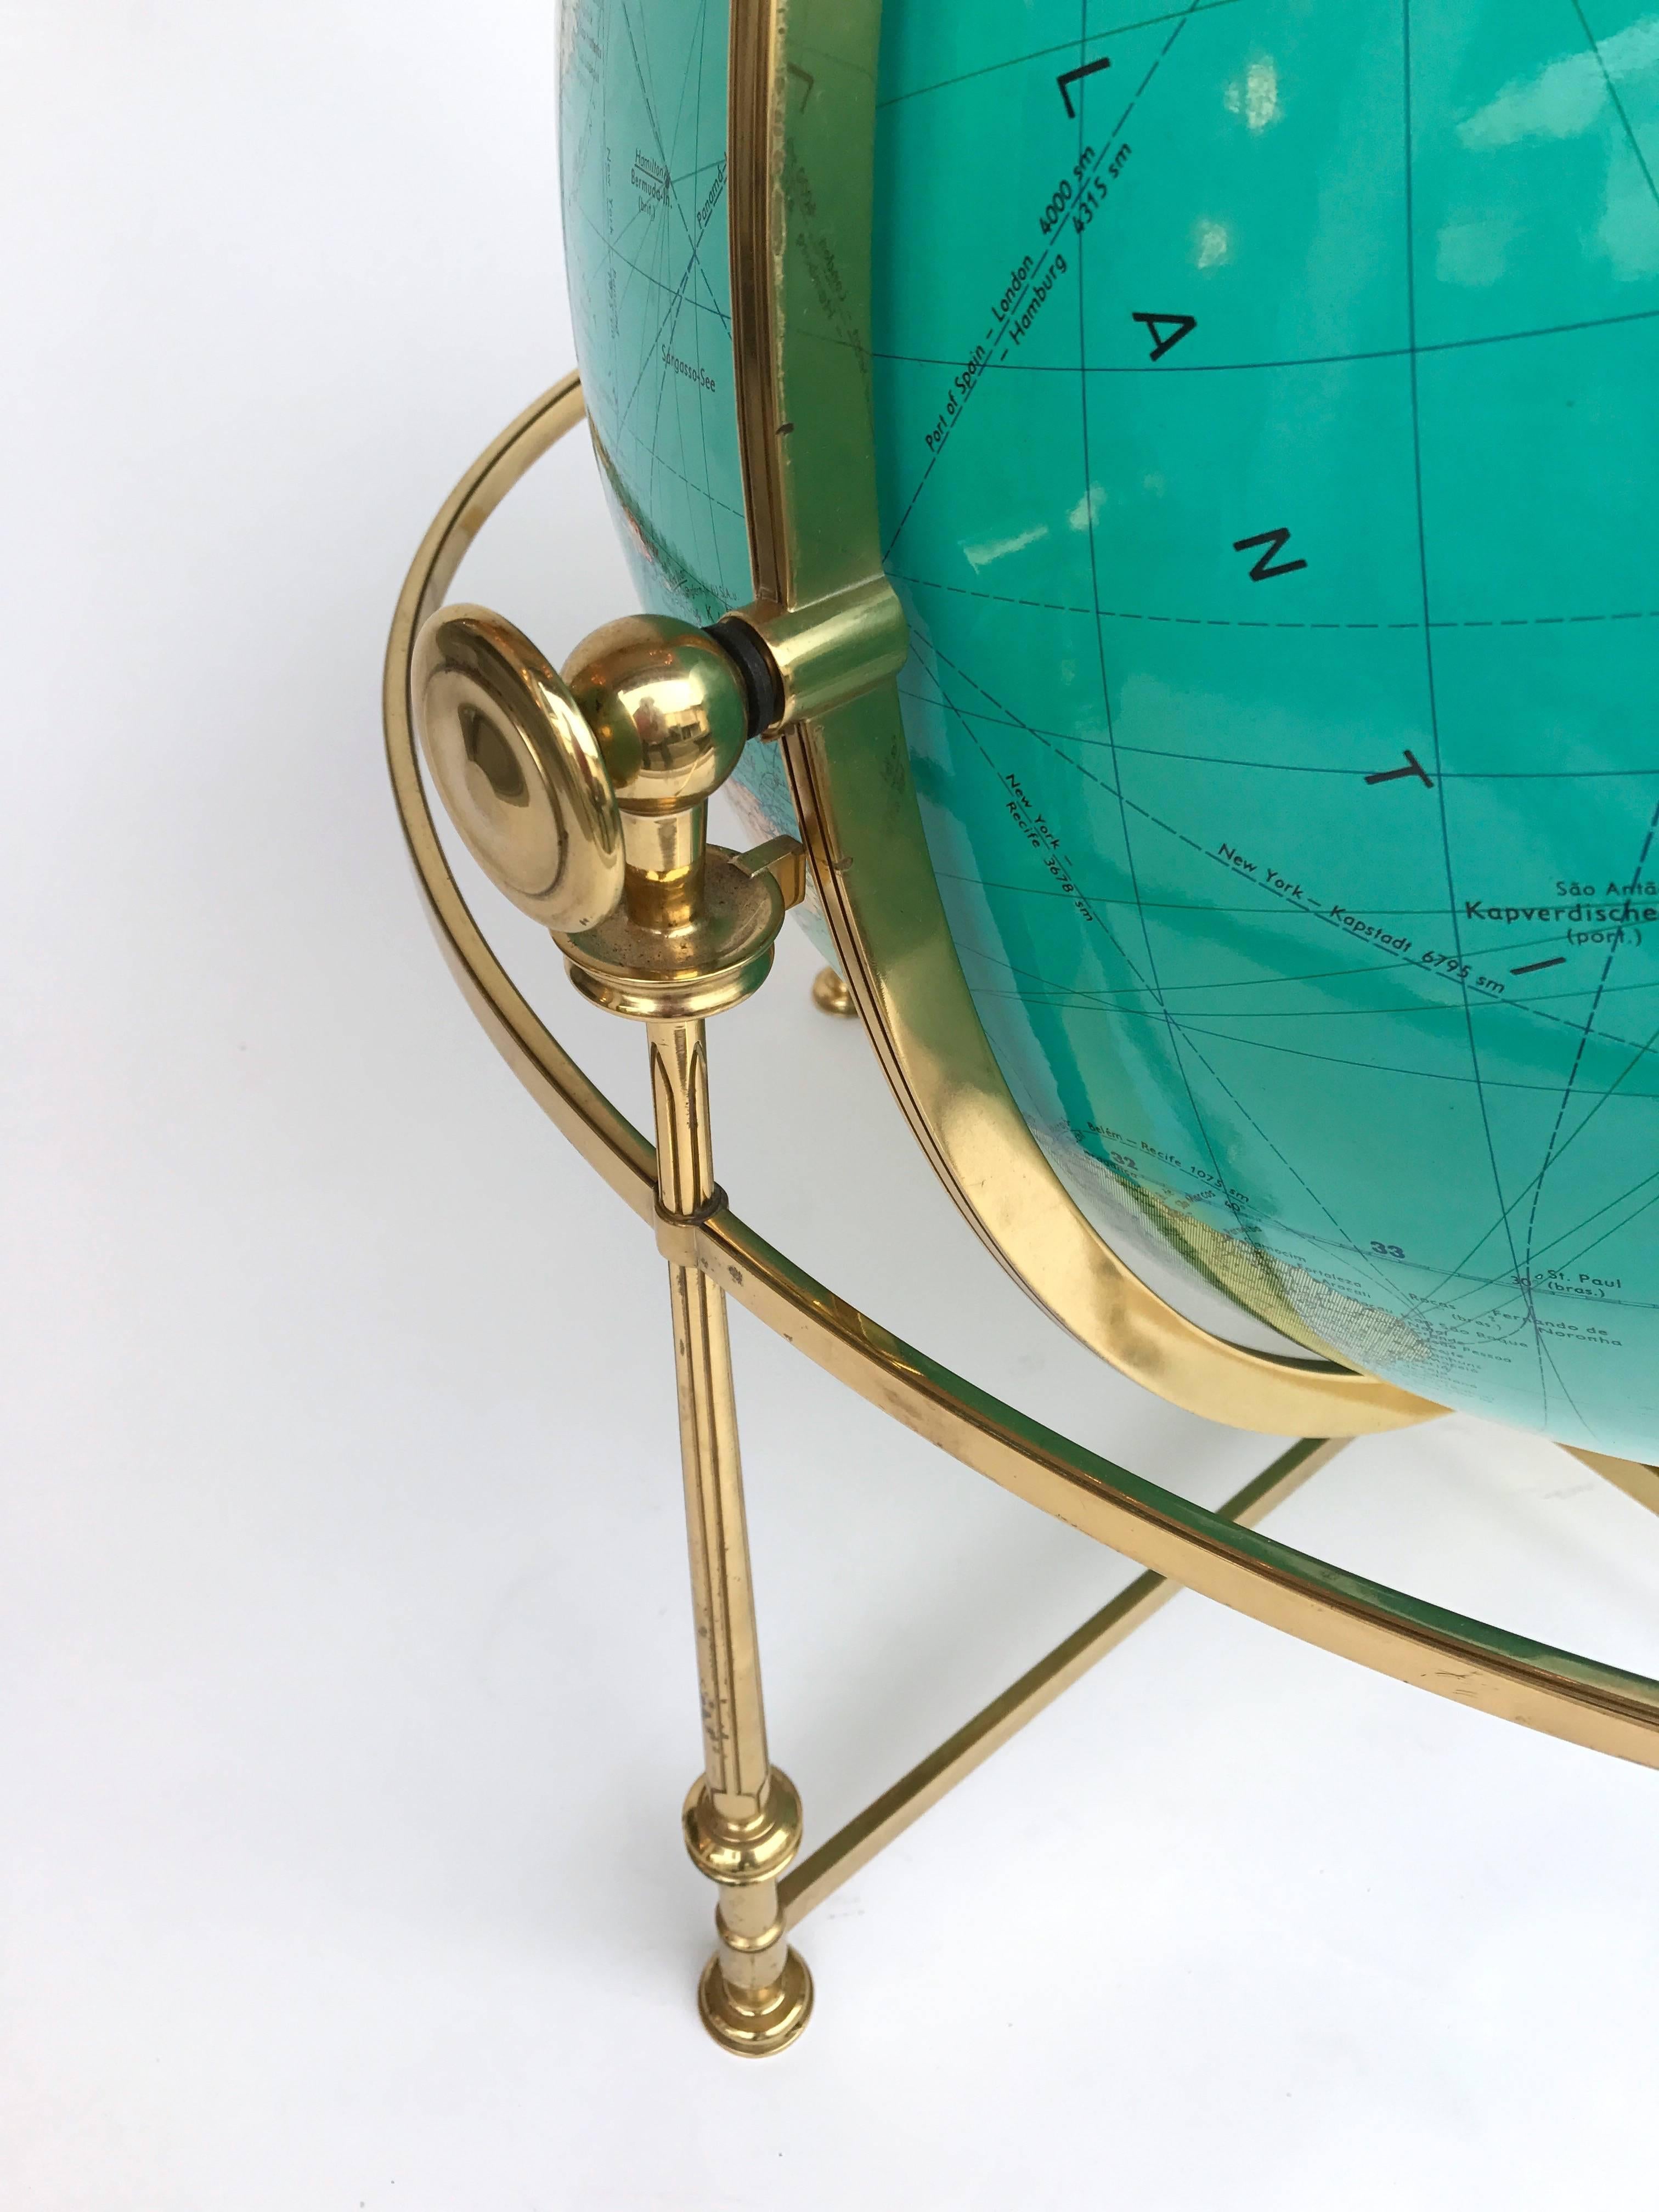 Huge lightning world globe map or ground world map. Decorated brass structure. Datation before 1971, Democratic Rep. of Congo is on the globe after 71 it become the Zaire. The editor name from Munchen is on the globe.